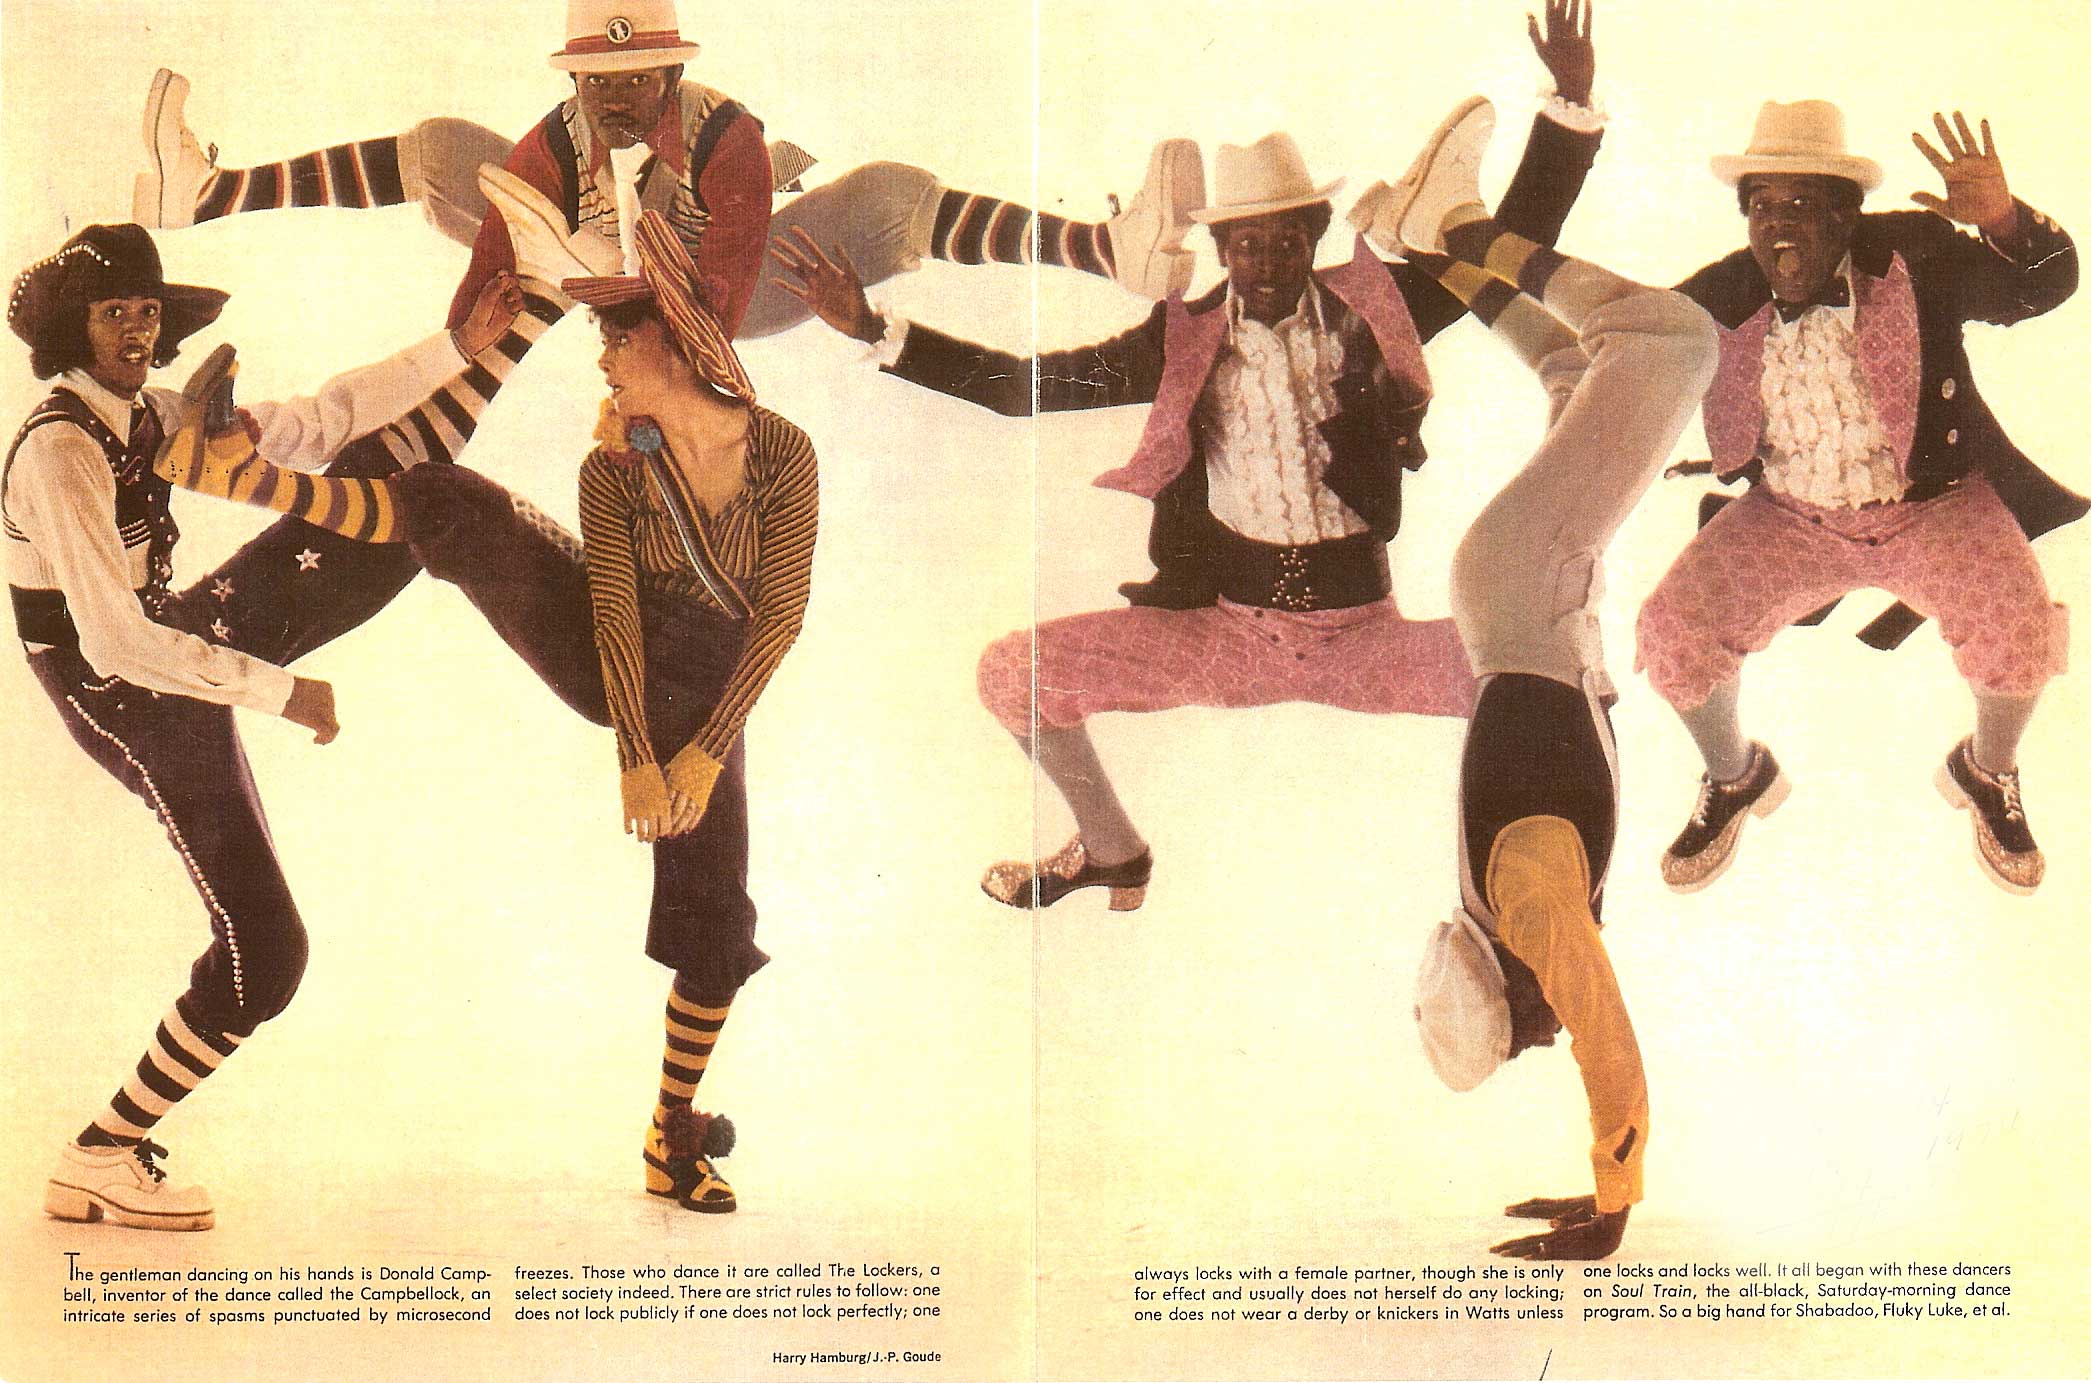 The Lockers: 1970s Soul Train Dancers Who Made Us Pop, Lock And